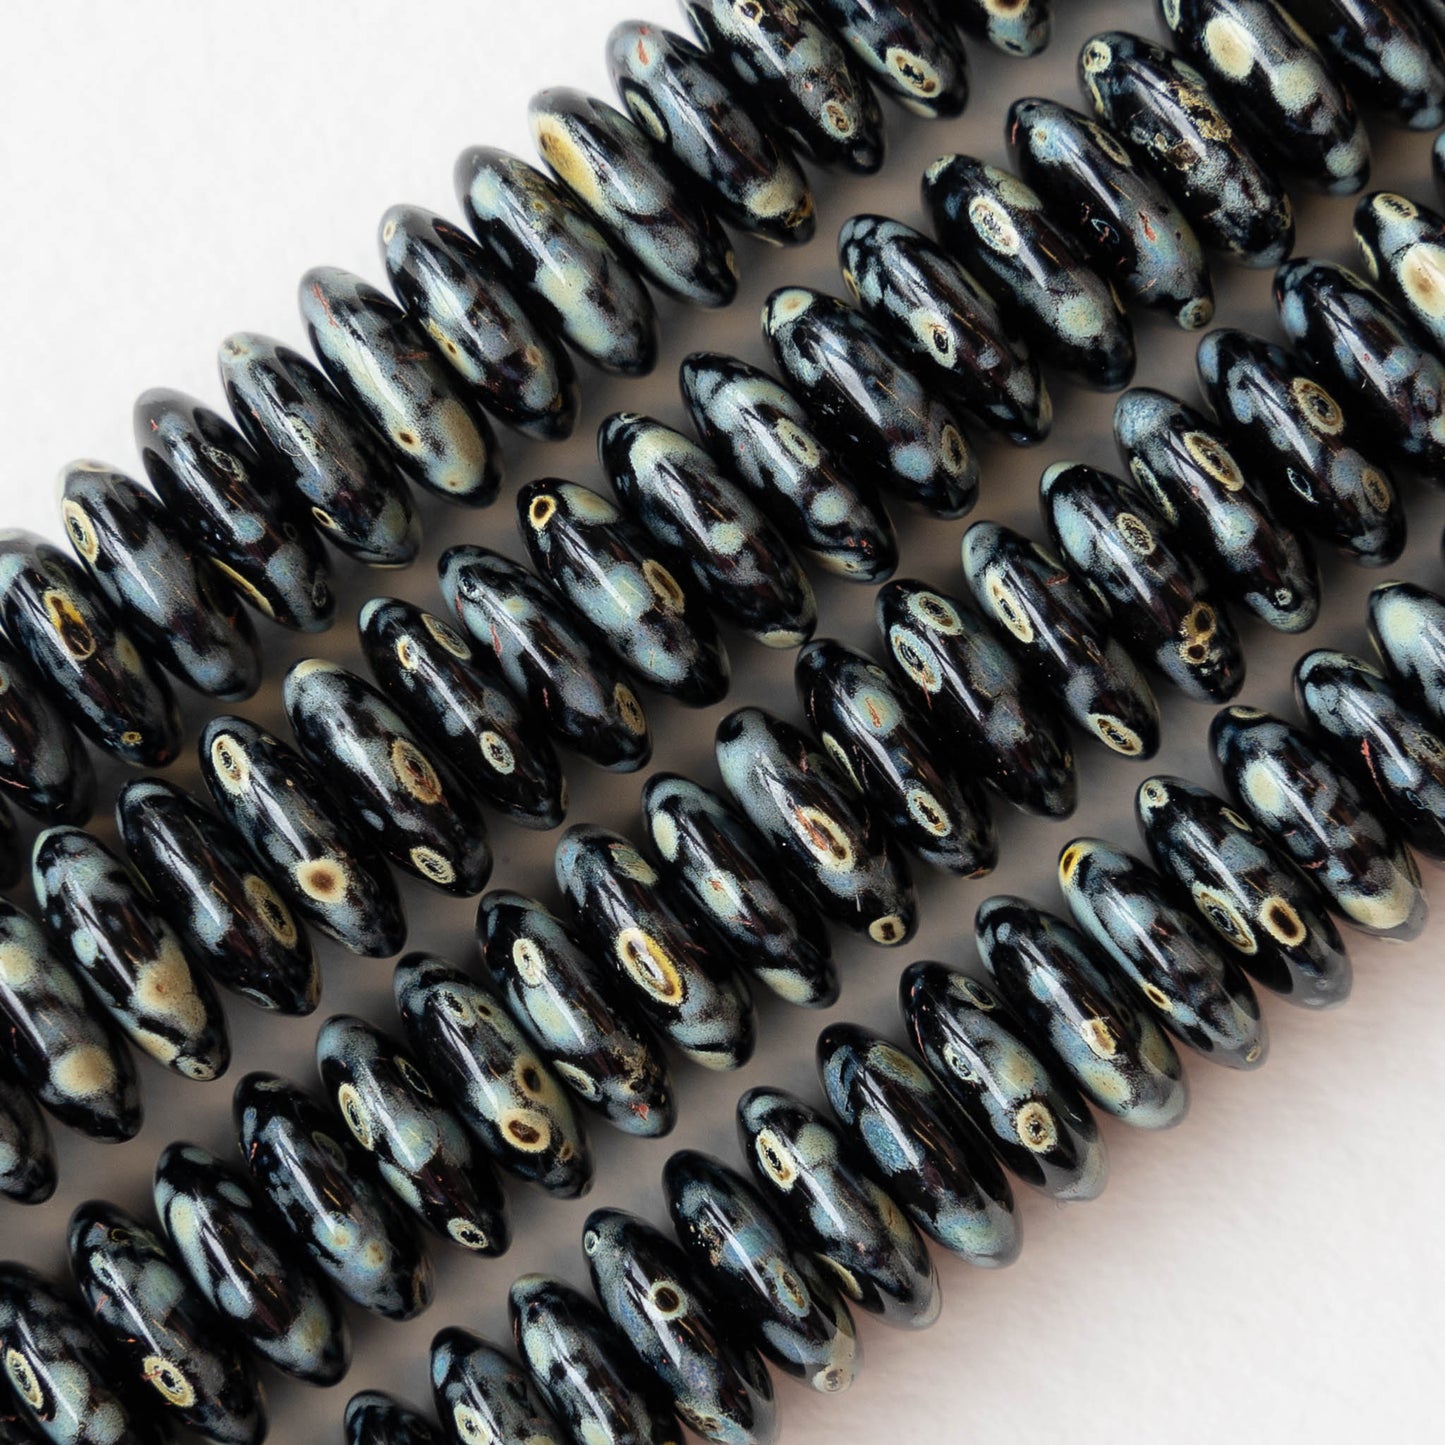 9.5mm Rondelle Beads - Opaque Black Picasso - 30